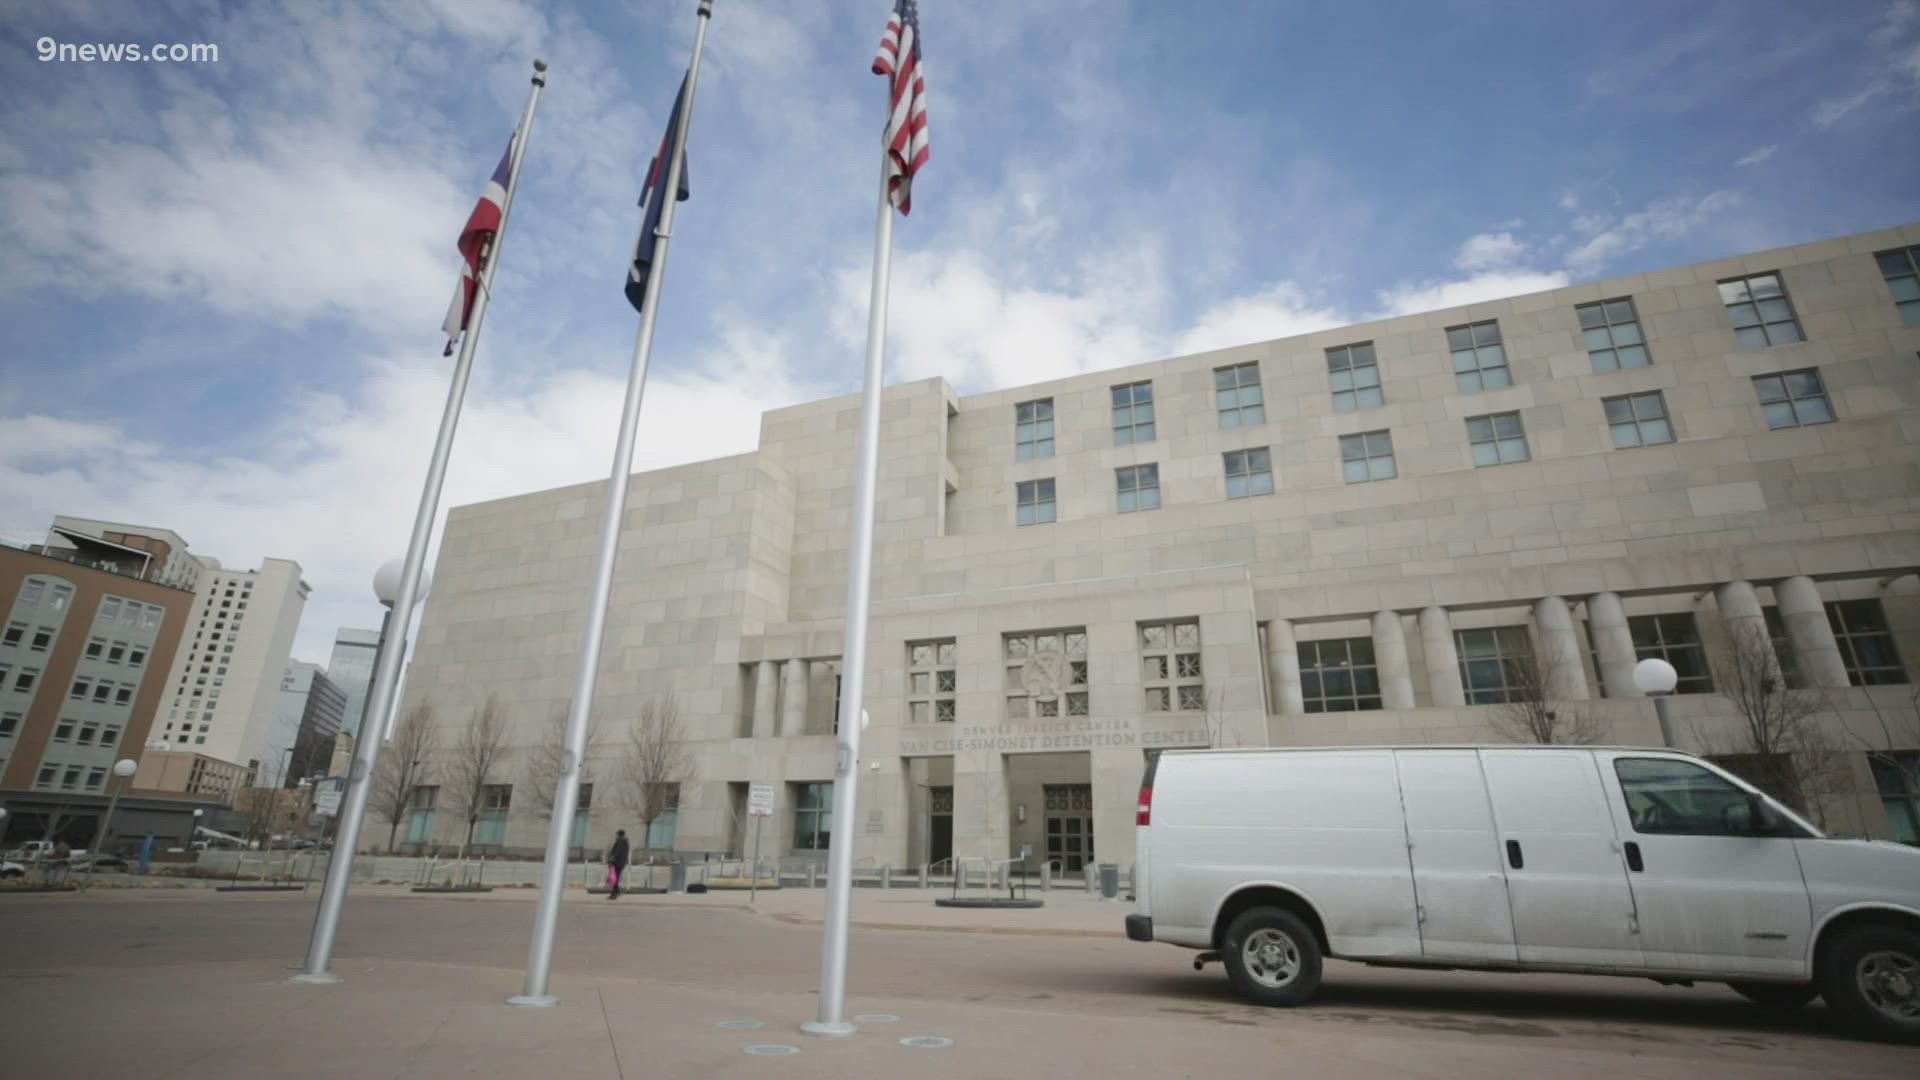 9Wants to Know has learned an inmate died in Denver’s downtown jail shortly after being put back into his cell despite experiencing “difficulty breathing."